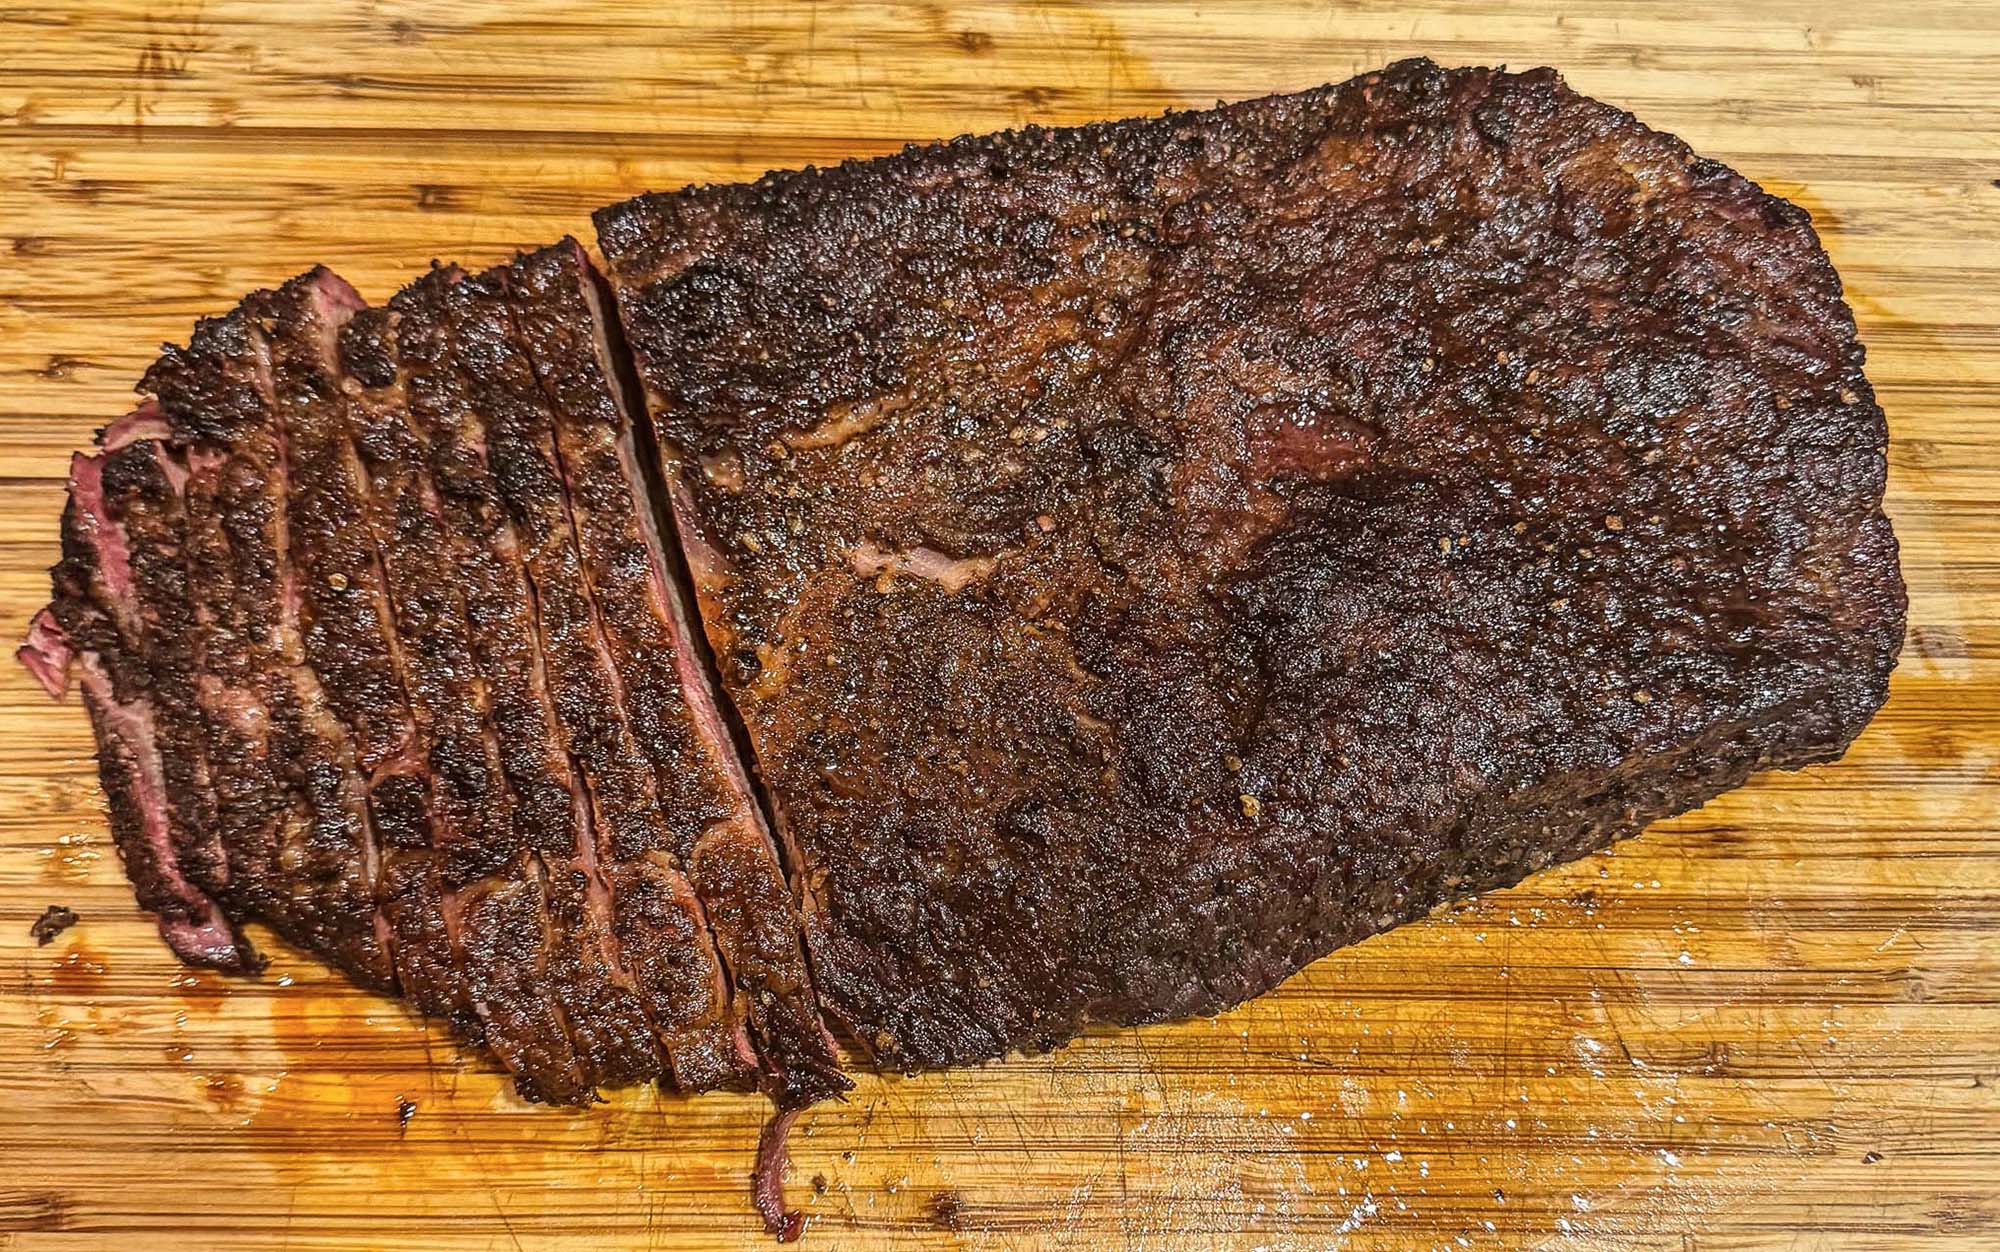 The Traeger Timberline XL turned out this impressive brisket.